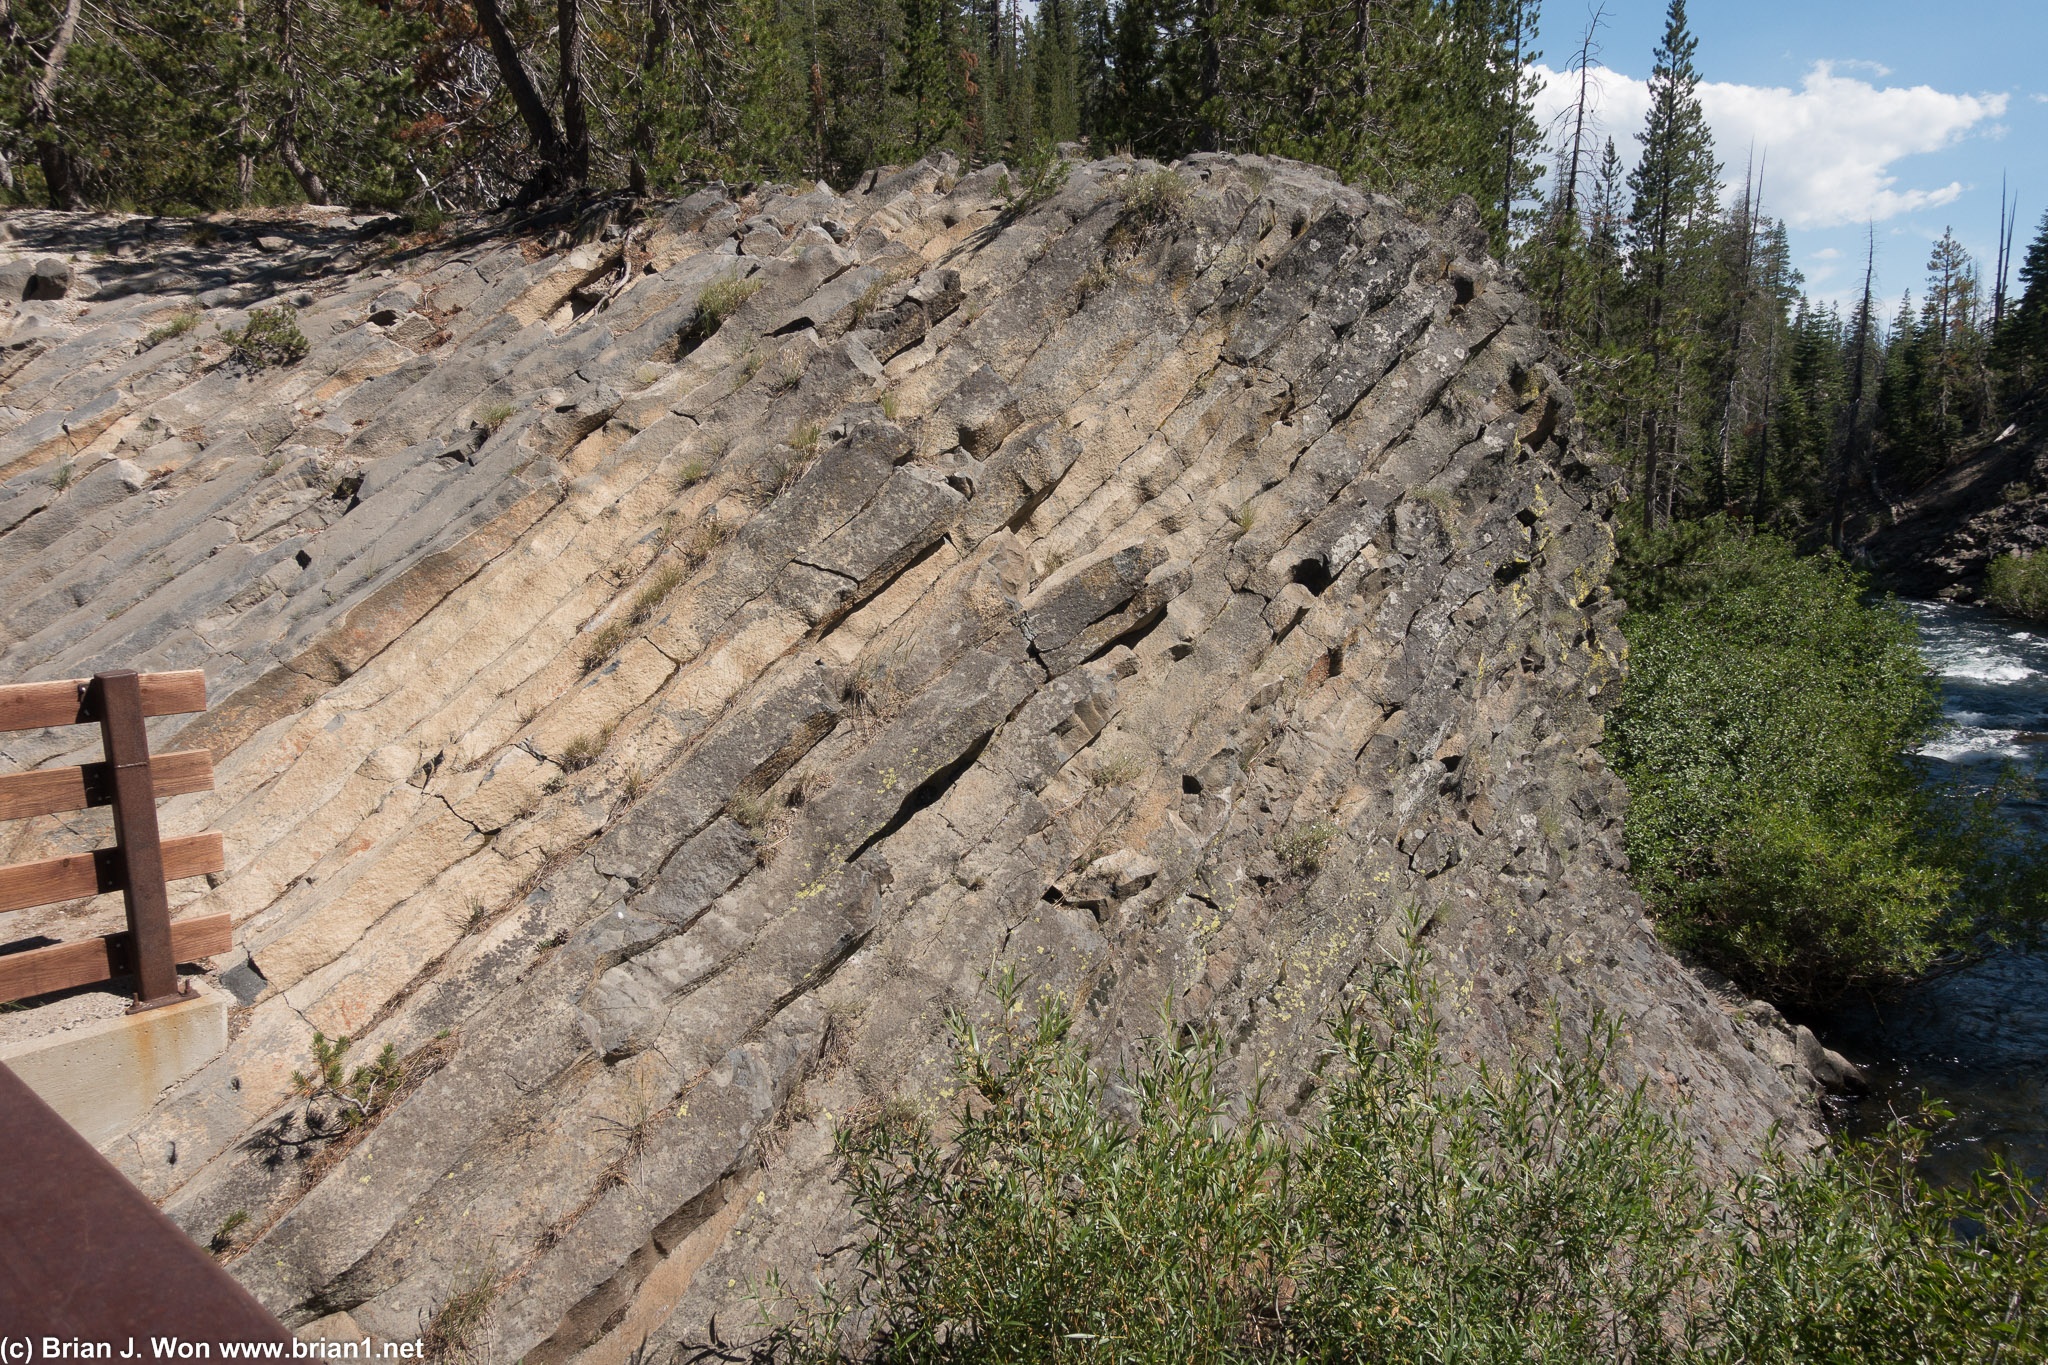 And the Devils Postpile itself.